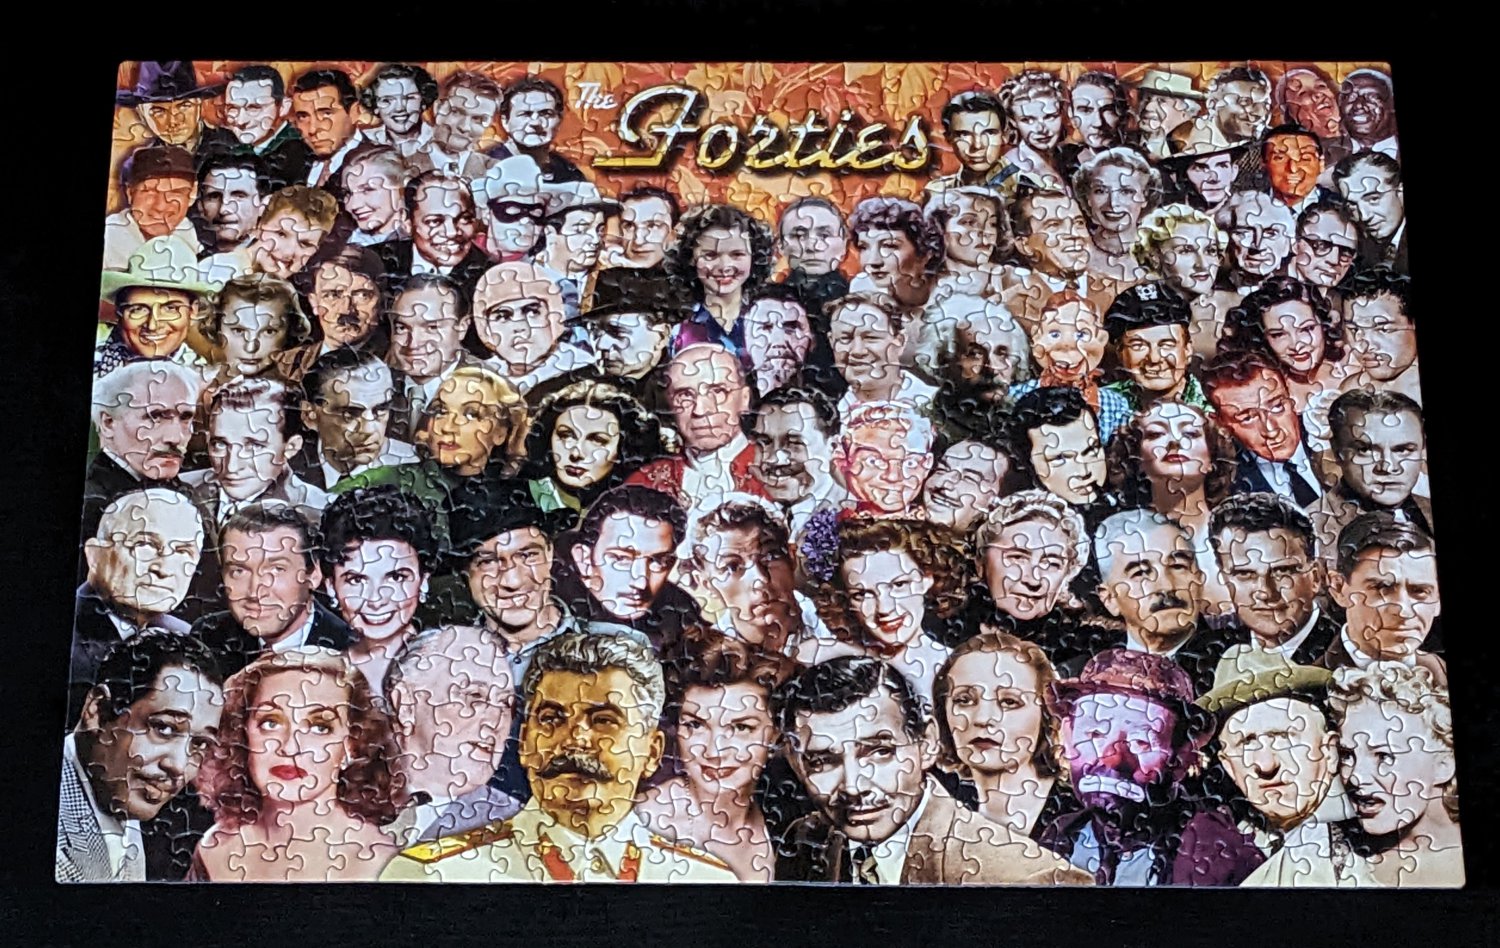 The Forties 500 Piece Jigsaw Puzzle Headline Newsmakers Challenge 1940s Decade COMPLETE